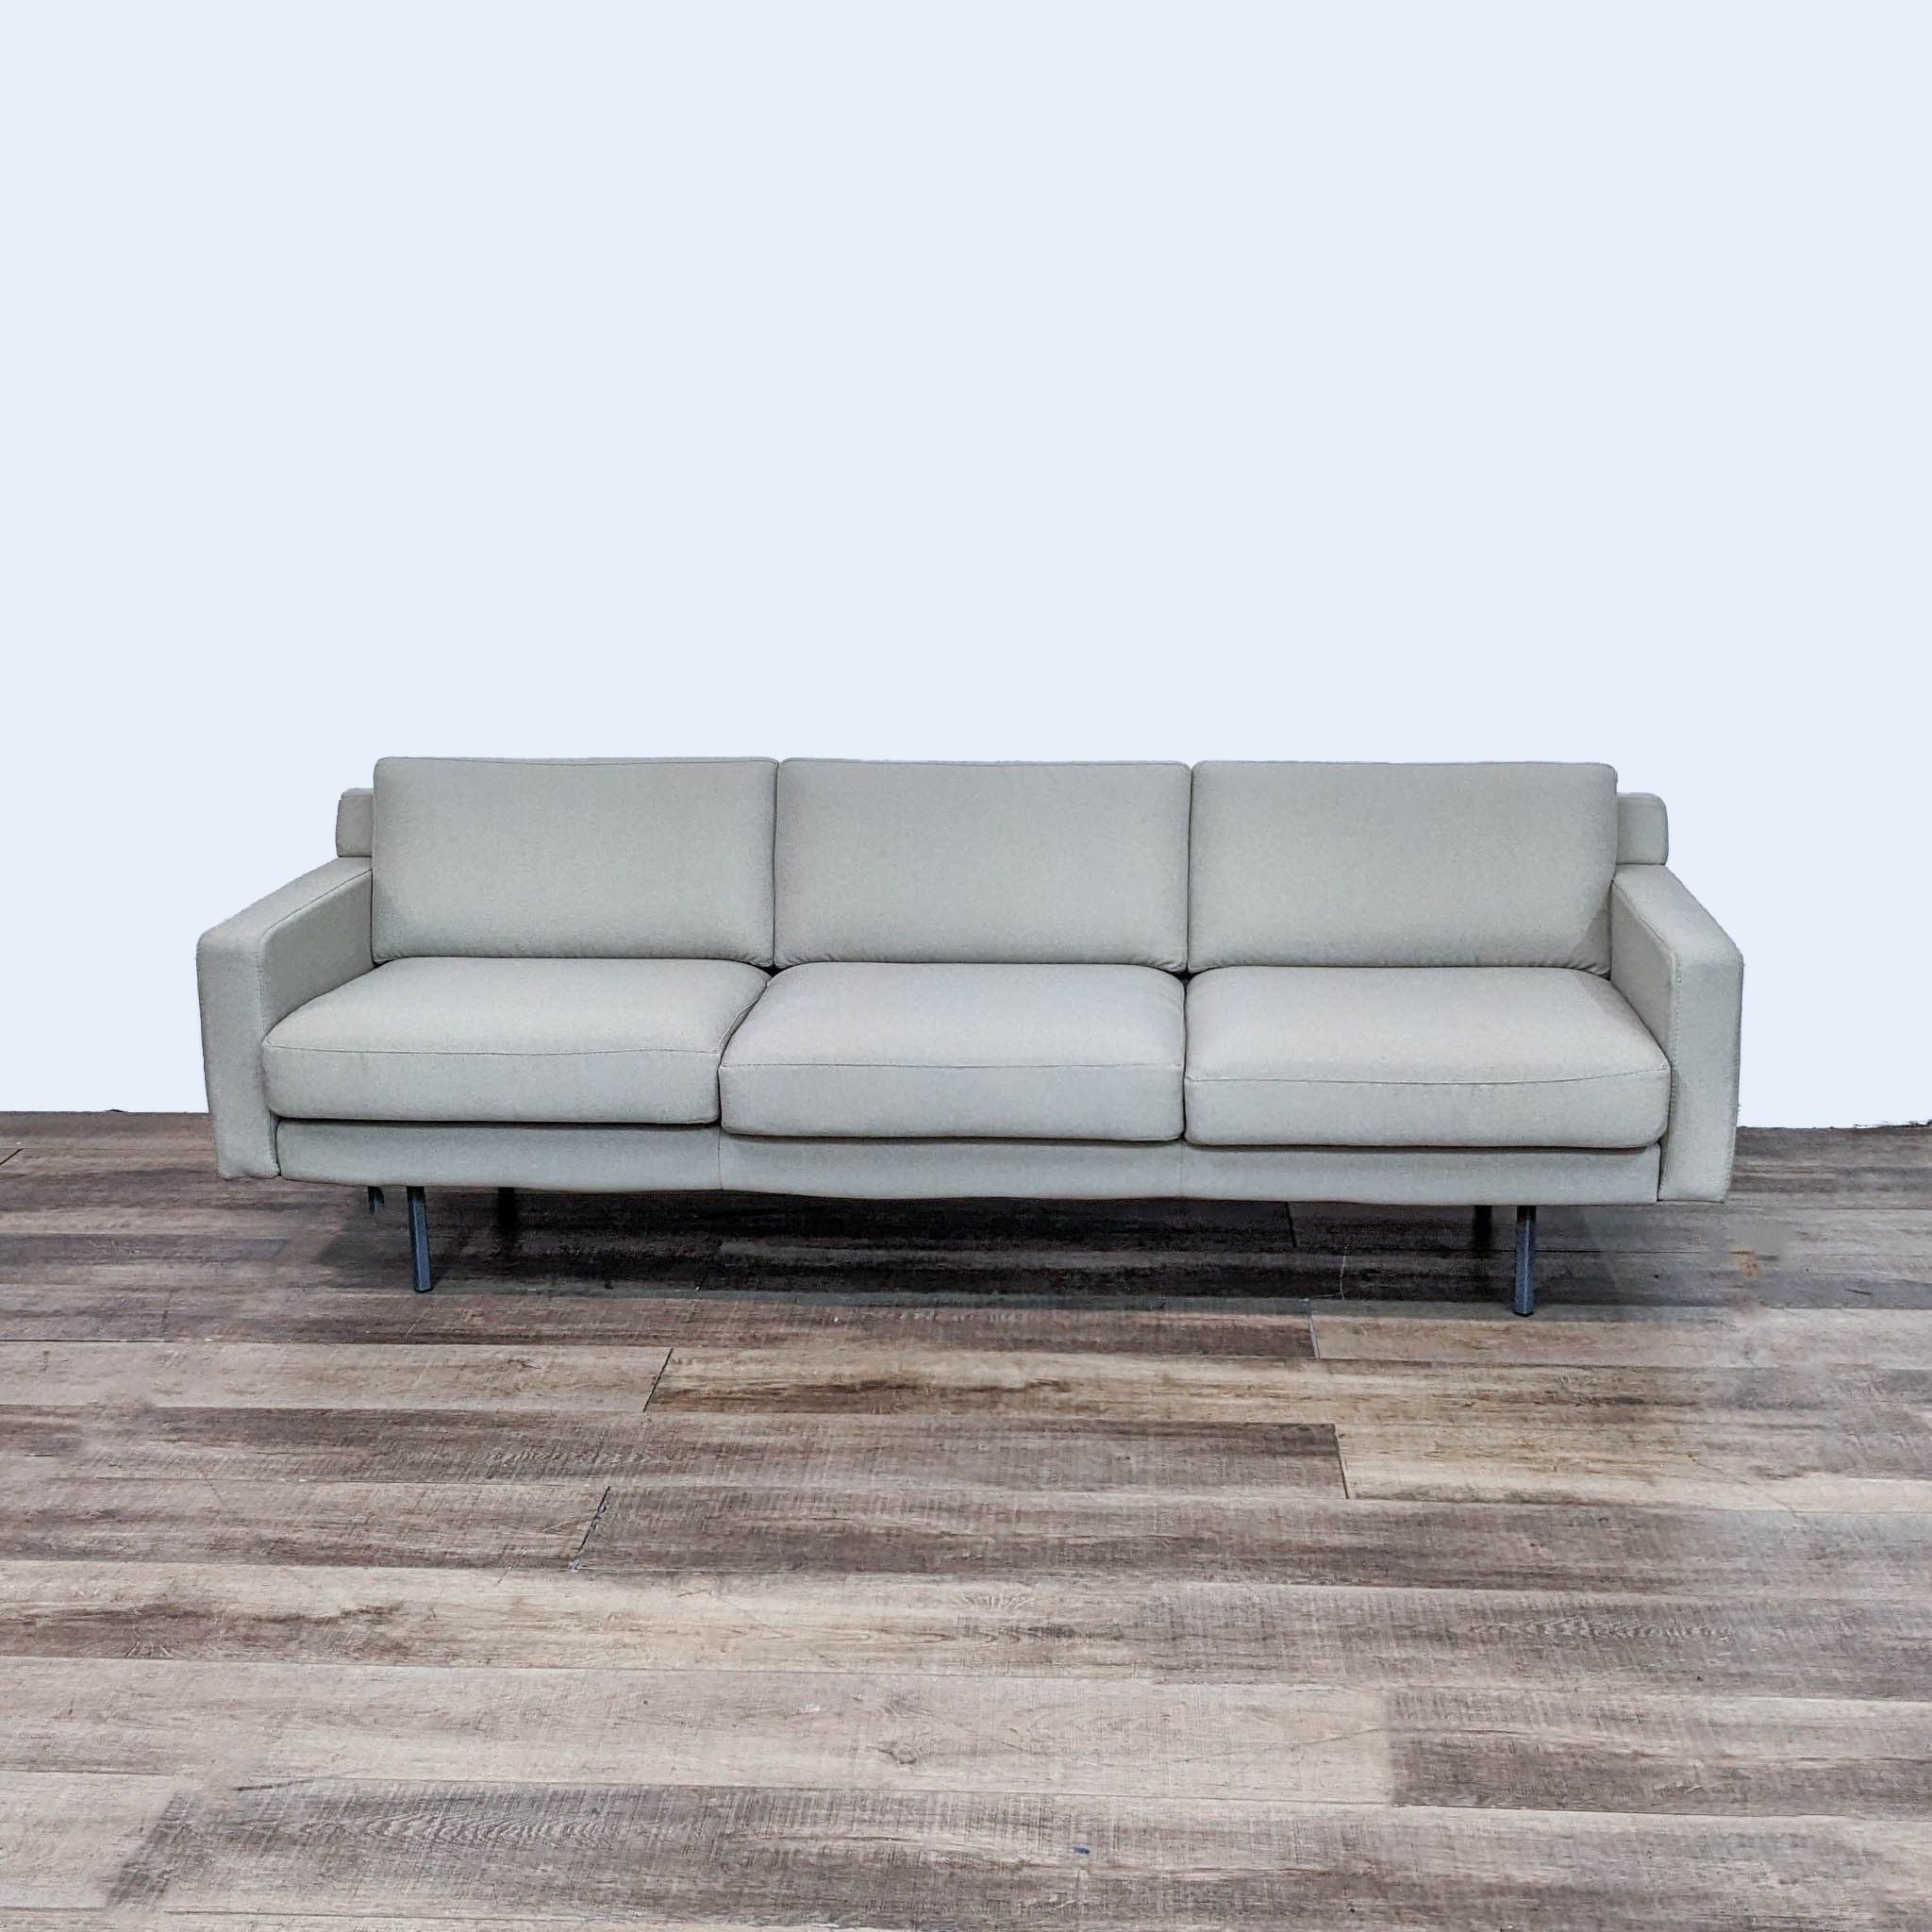 Three-seater minimalist line sofa by Rowe Furniture with square arms and metal legs, displayed from an angled perspective.